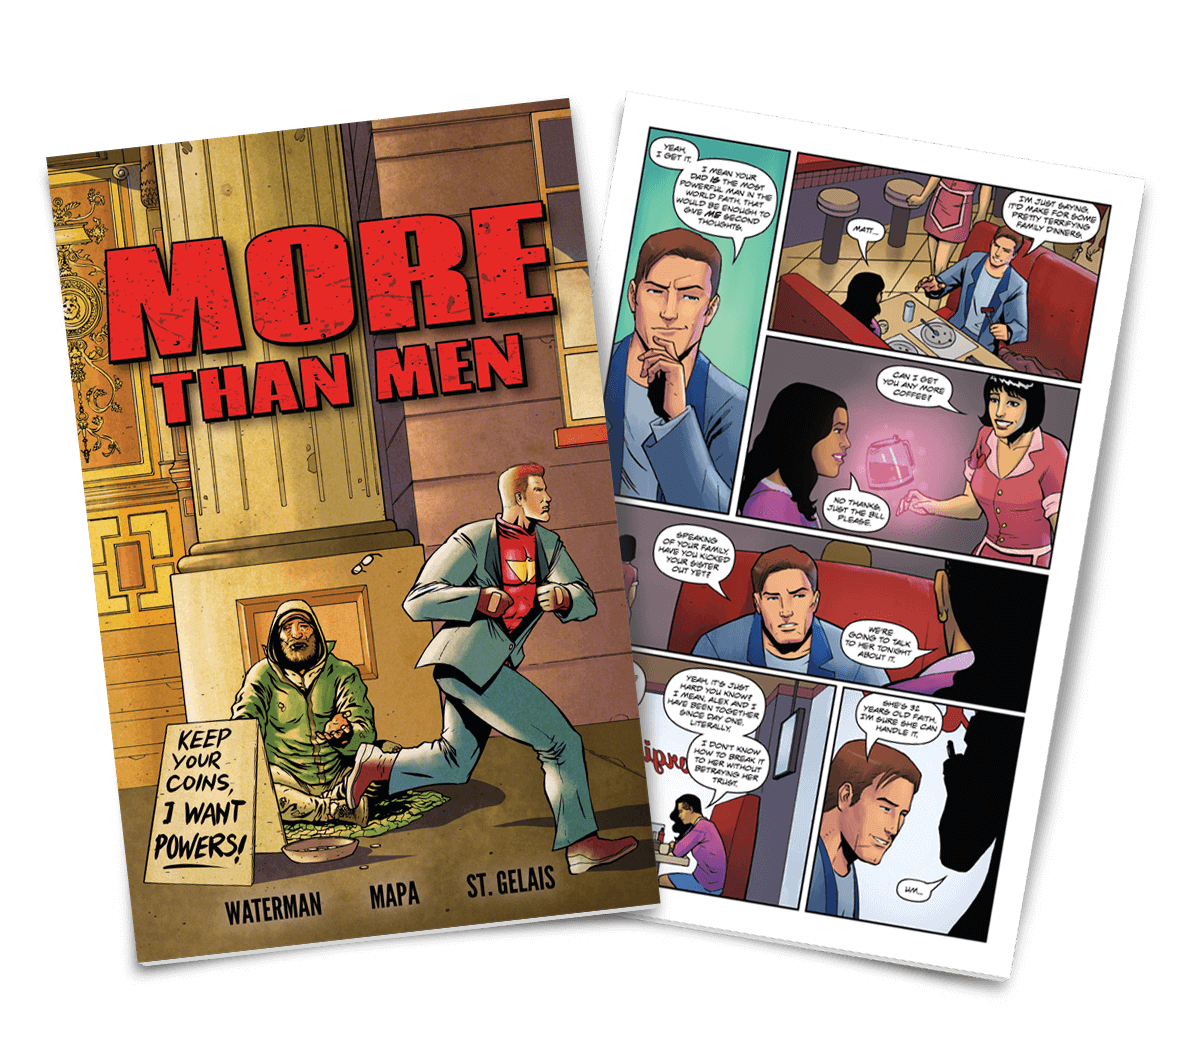 A mockup of the More Than Men cover. A man takes off his suit jacket to reveal a supersuit. He runs past a homeless man begging for change, not seeming to notice him.